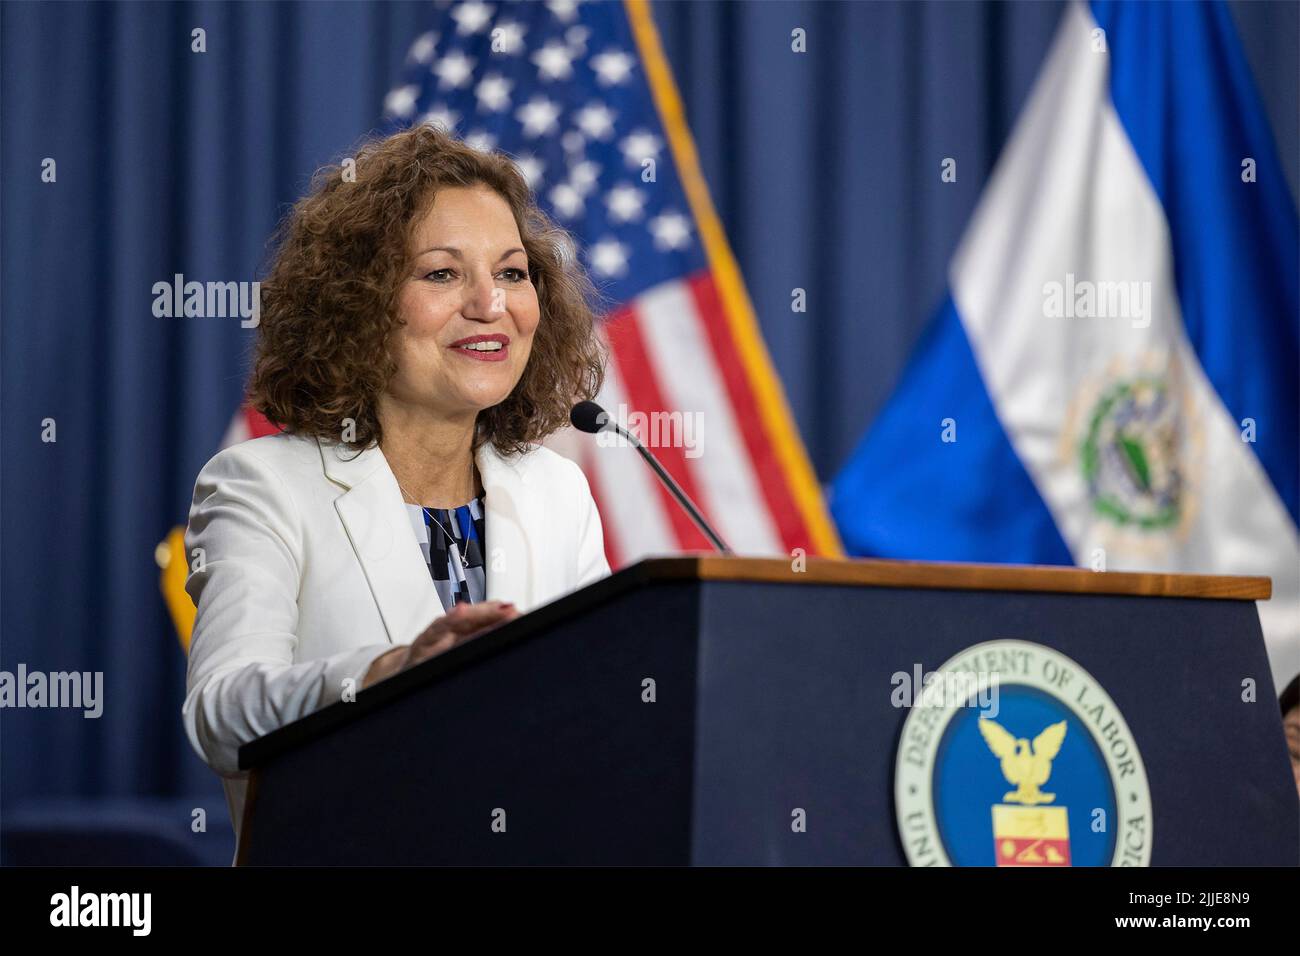 Washington, United States of America. 10 May, 2022. NLRB General Counsel Jennifer Abruzzo delivers remarks at the signing ceremony for the Consular Partnership Program at the US Department of Labor Headquarters, May 10, 2022 in Washington, D.C. The CPP provides protections for migrant workers in the United States.  Credit: Alyson Fligg/Dept of Labor/Alamy Live News Stock Photo